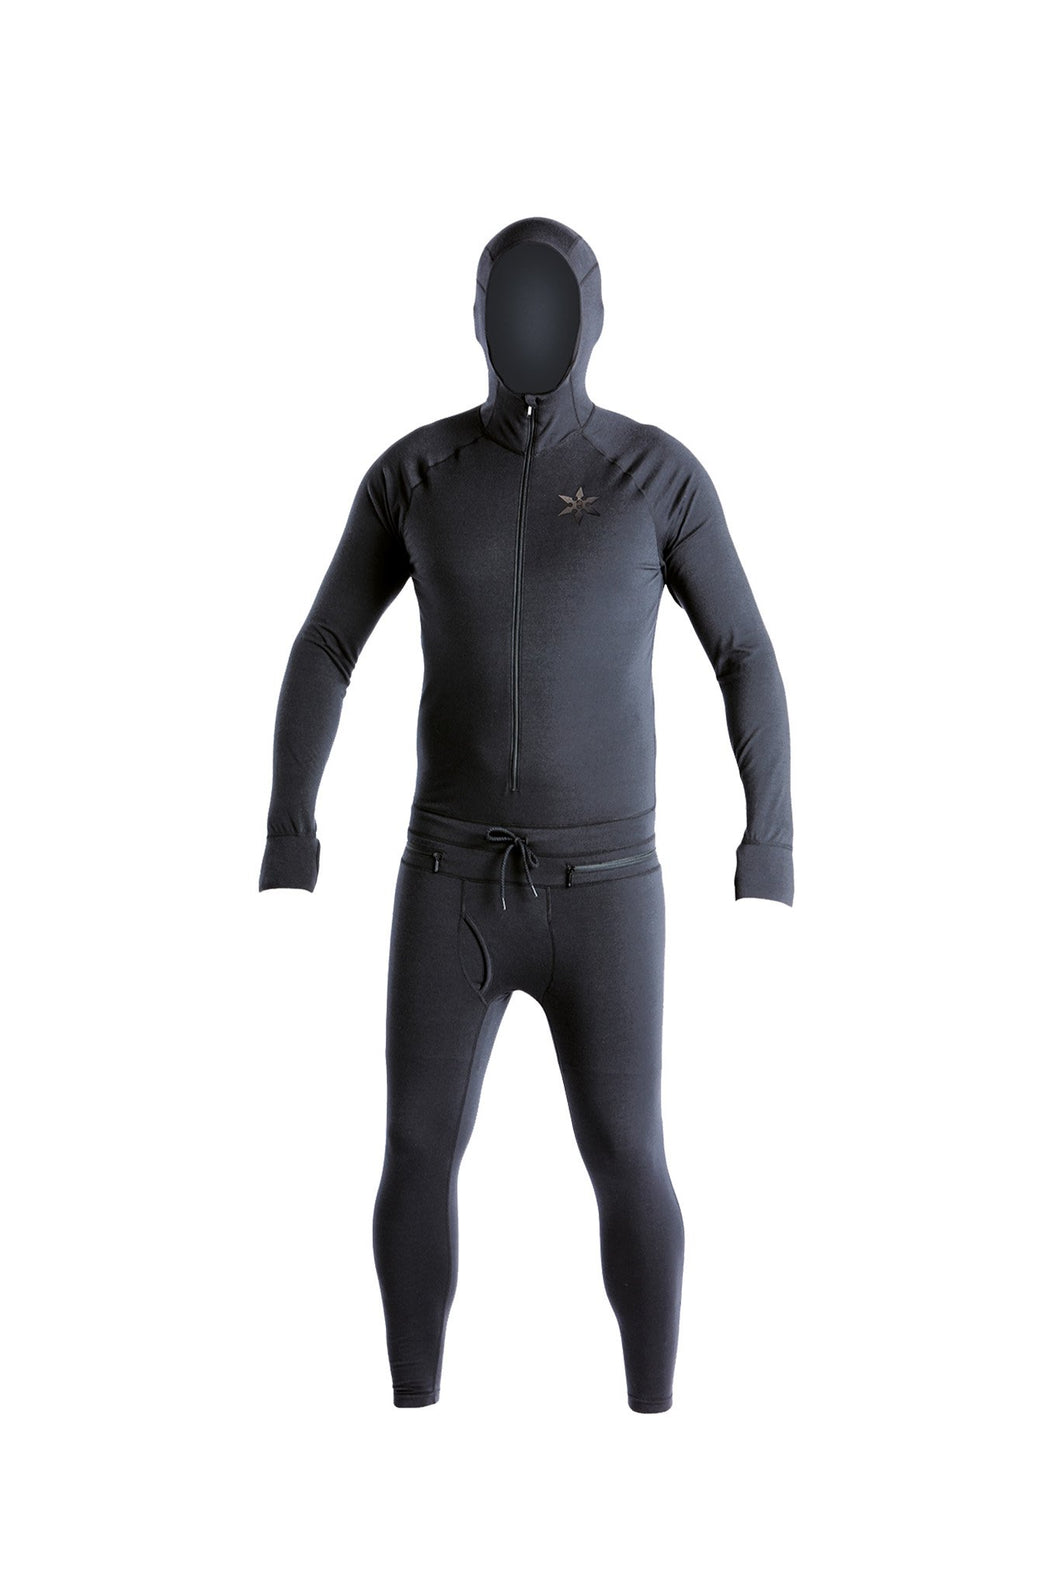 Black snowboard men's one piece thermal base layer.